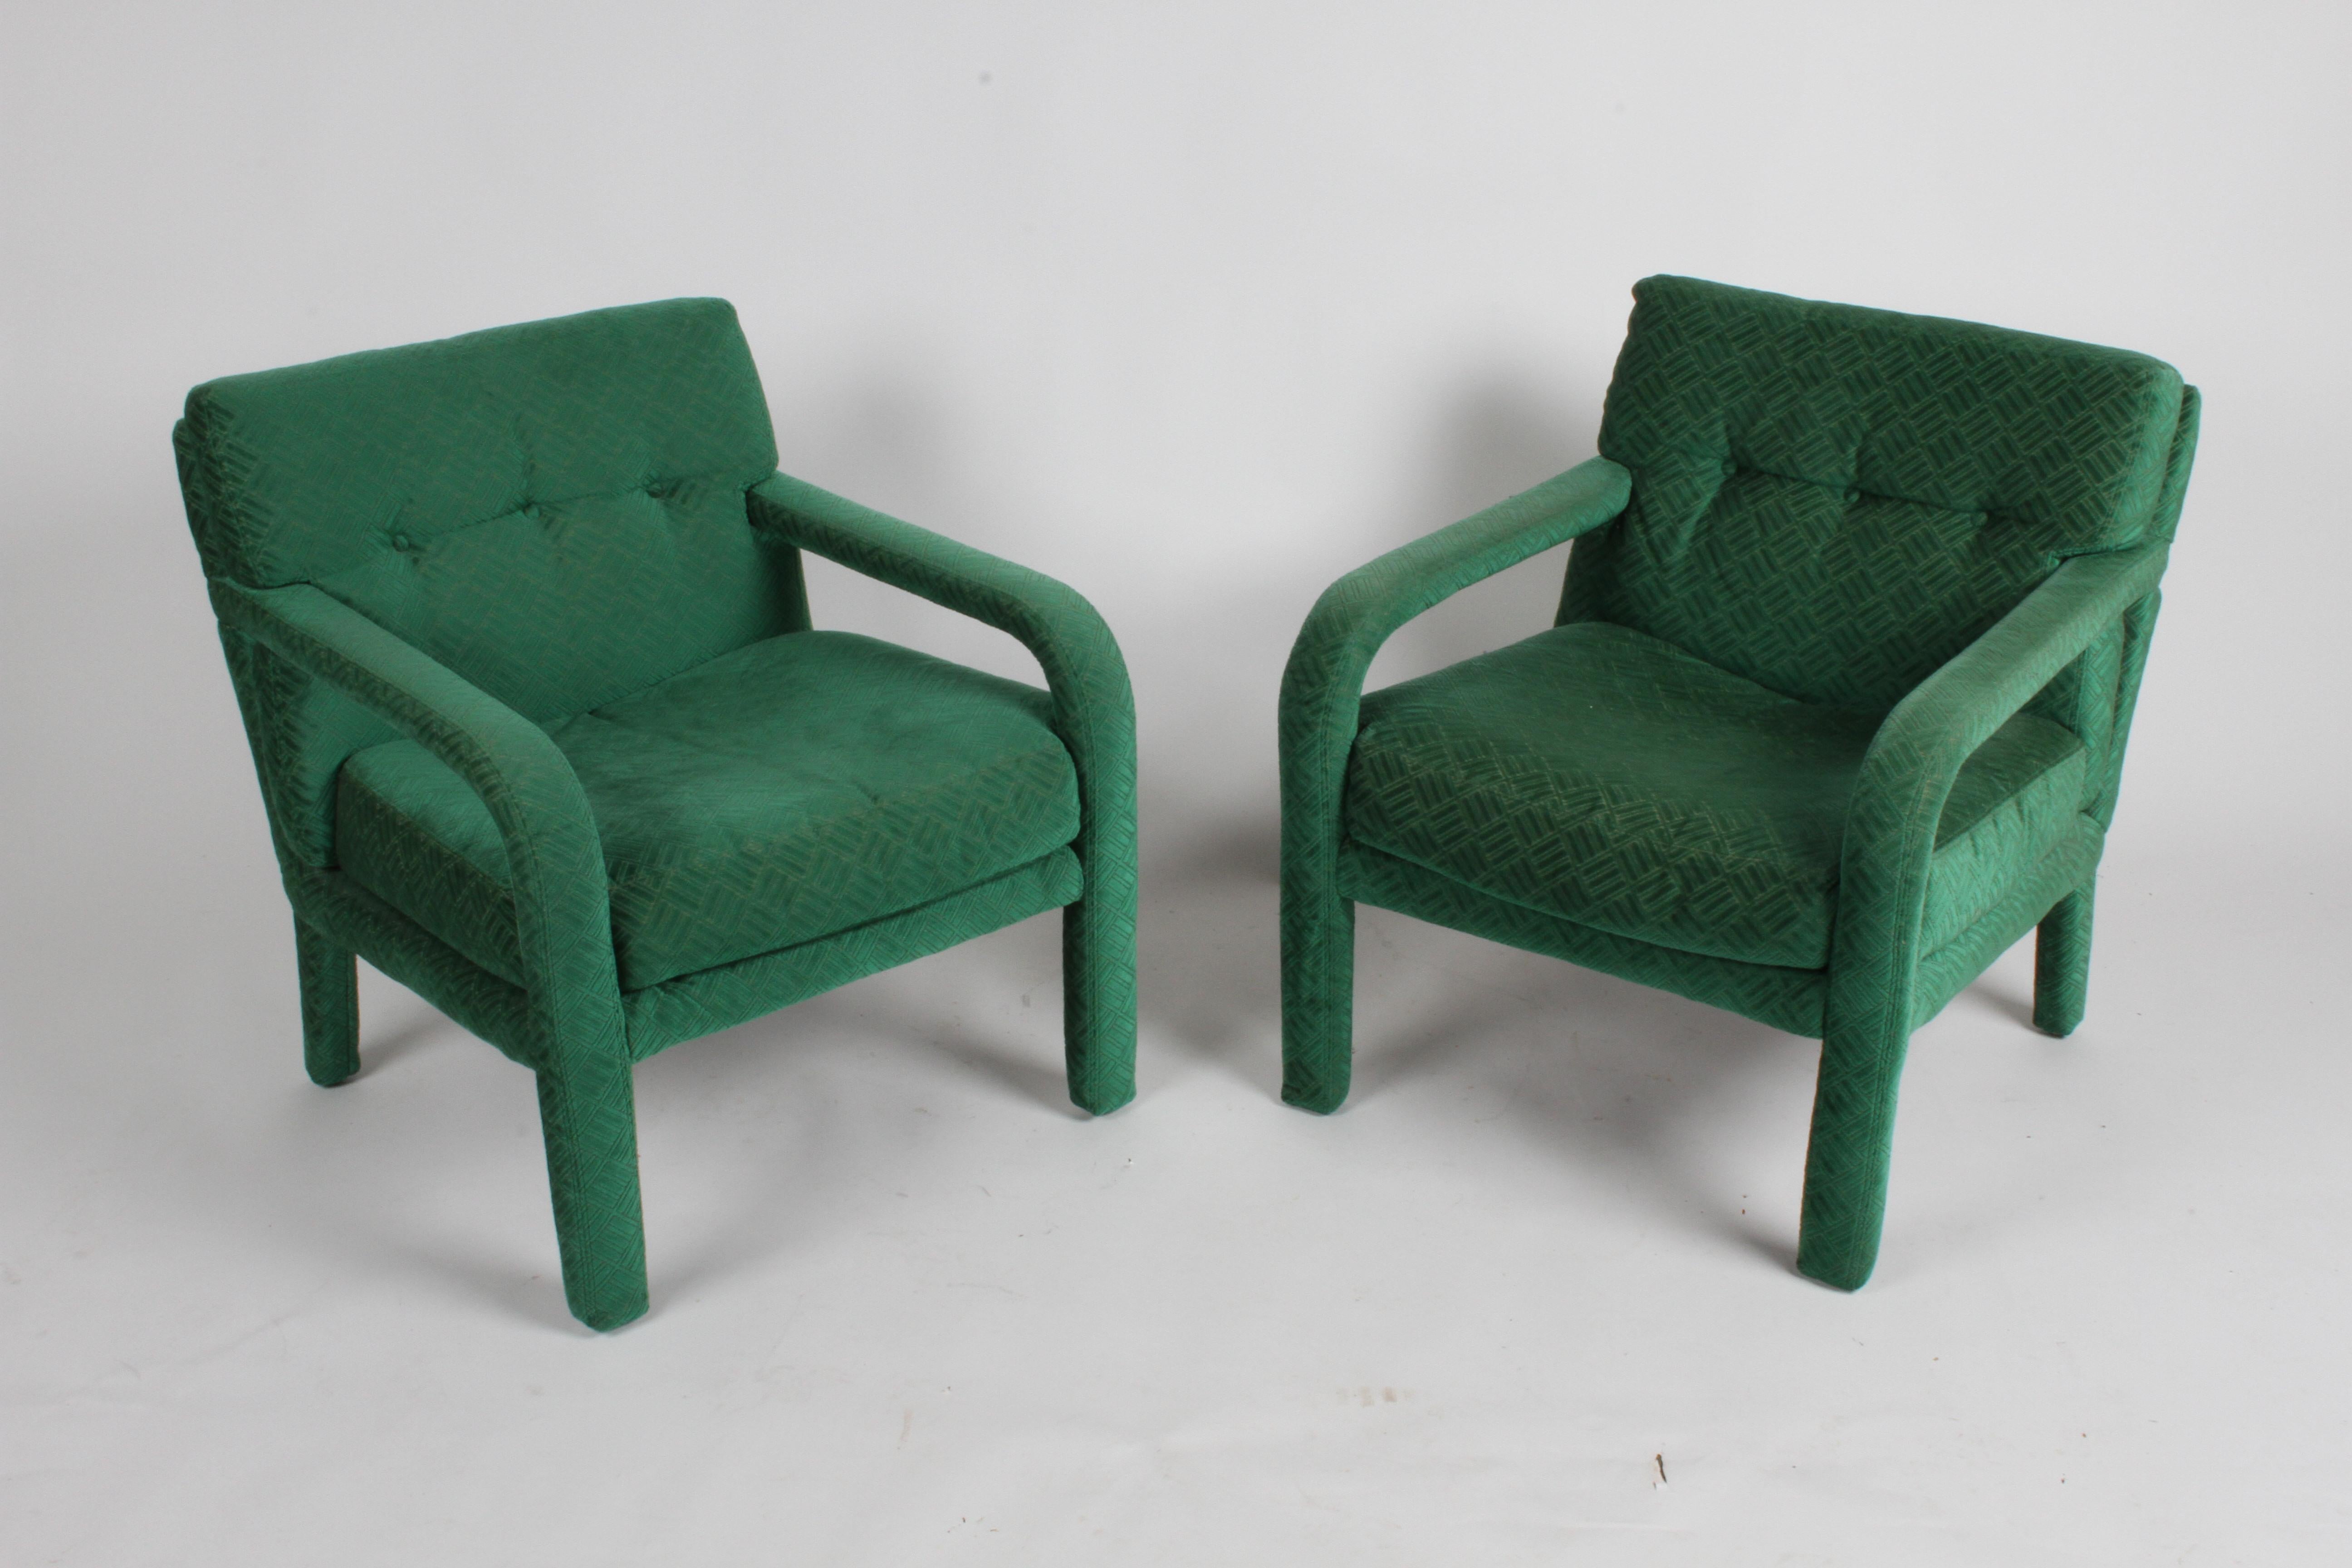 Vintage pair of Directional circa 1970s fully upholstered lounge chairs with arms, in the original emerald green textured upholstery. One chair shows more wear than the other, very comfortable, foam is good. Labels to underside Directional -